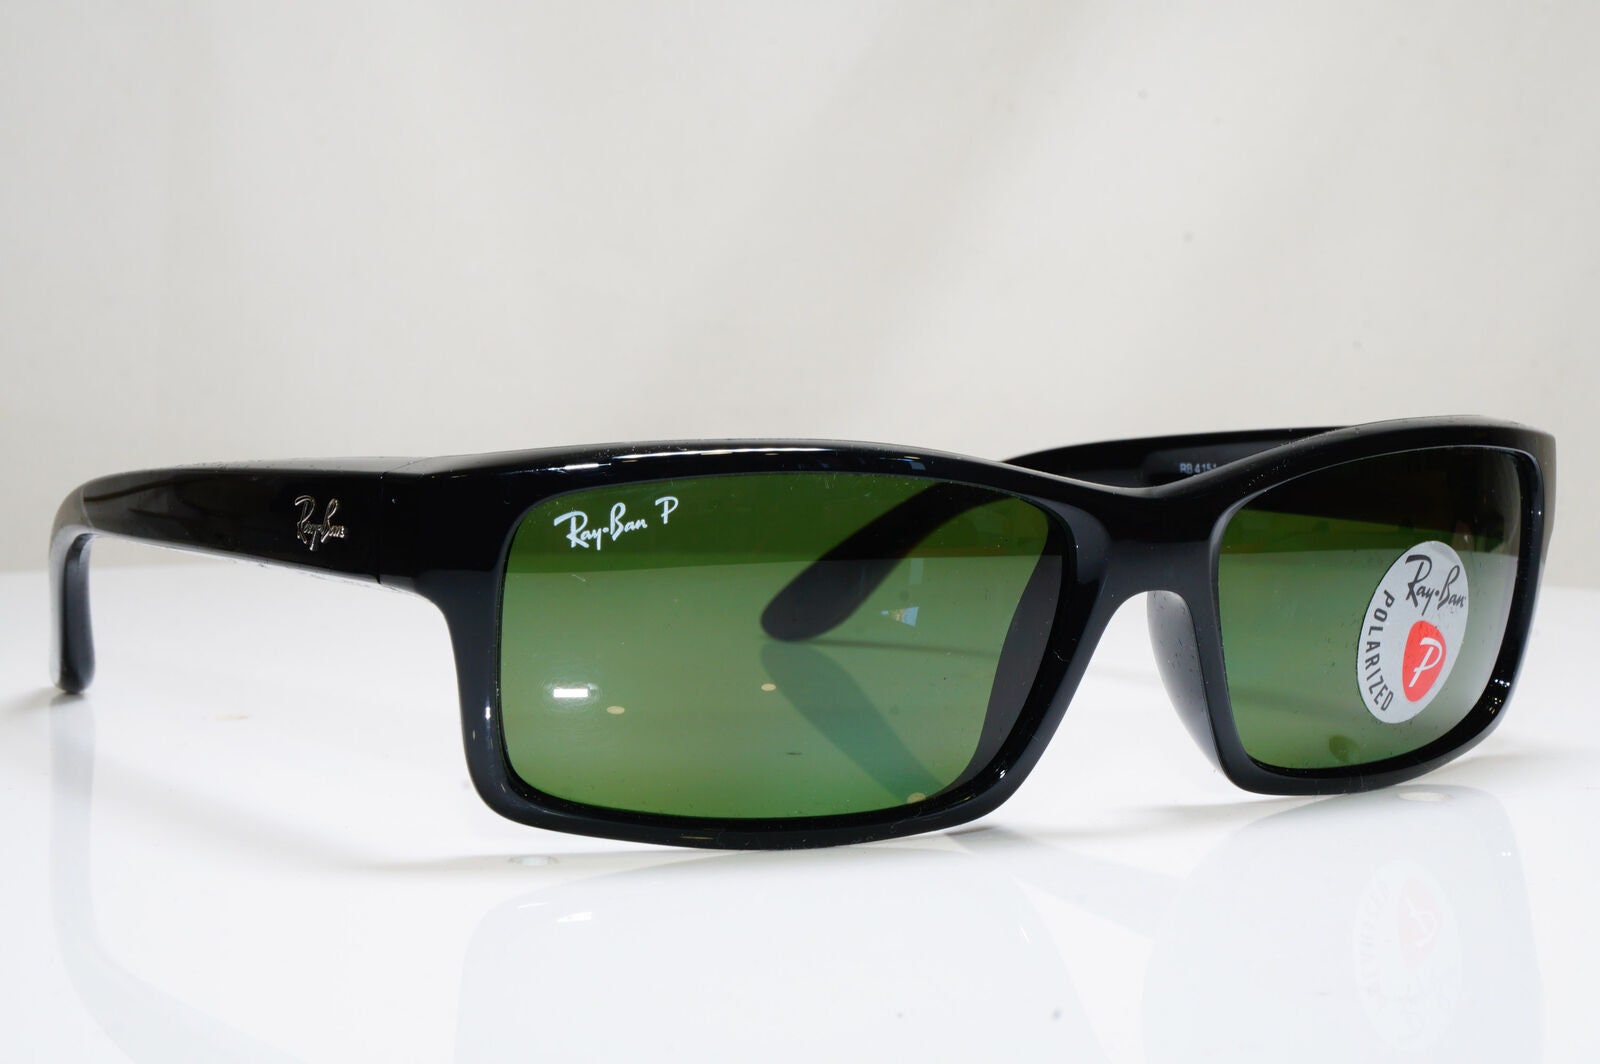 Ray Ban Rb4151 for sale | Only 4 left at -60%